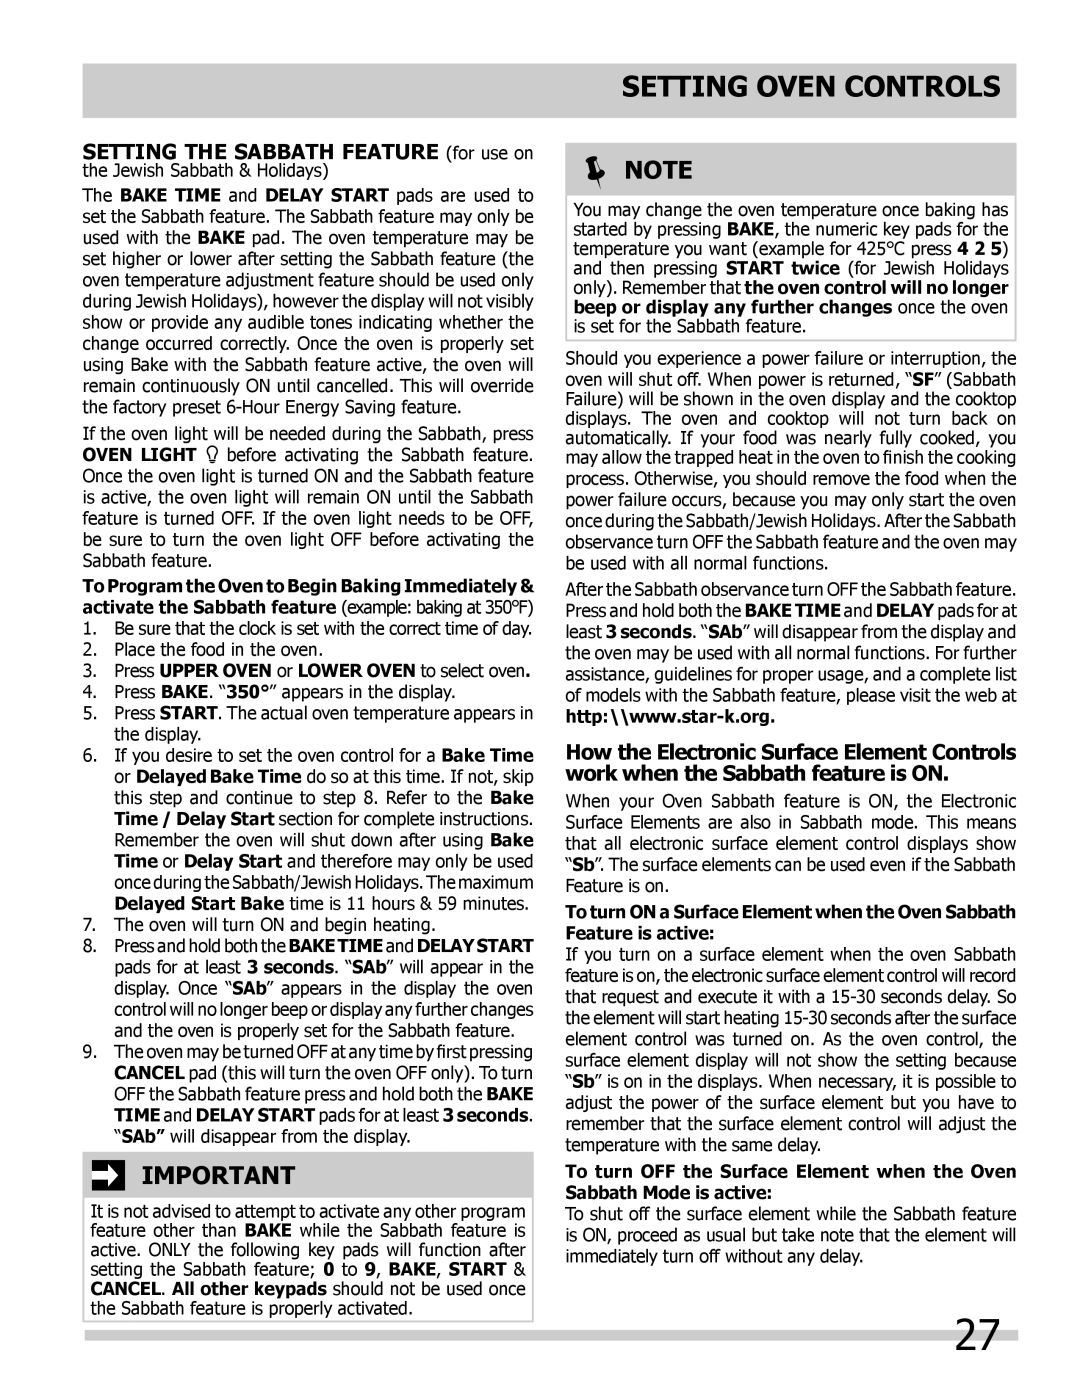 Frigidaire L5V3E4, 318205204 important safety instructions Setting Oven Controls, Note 